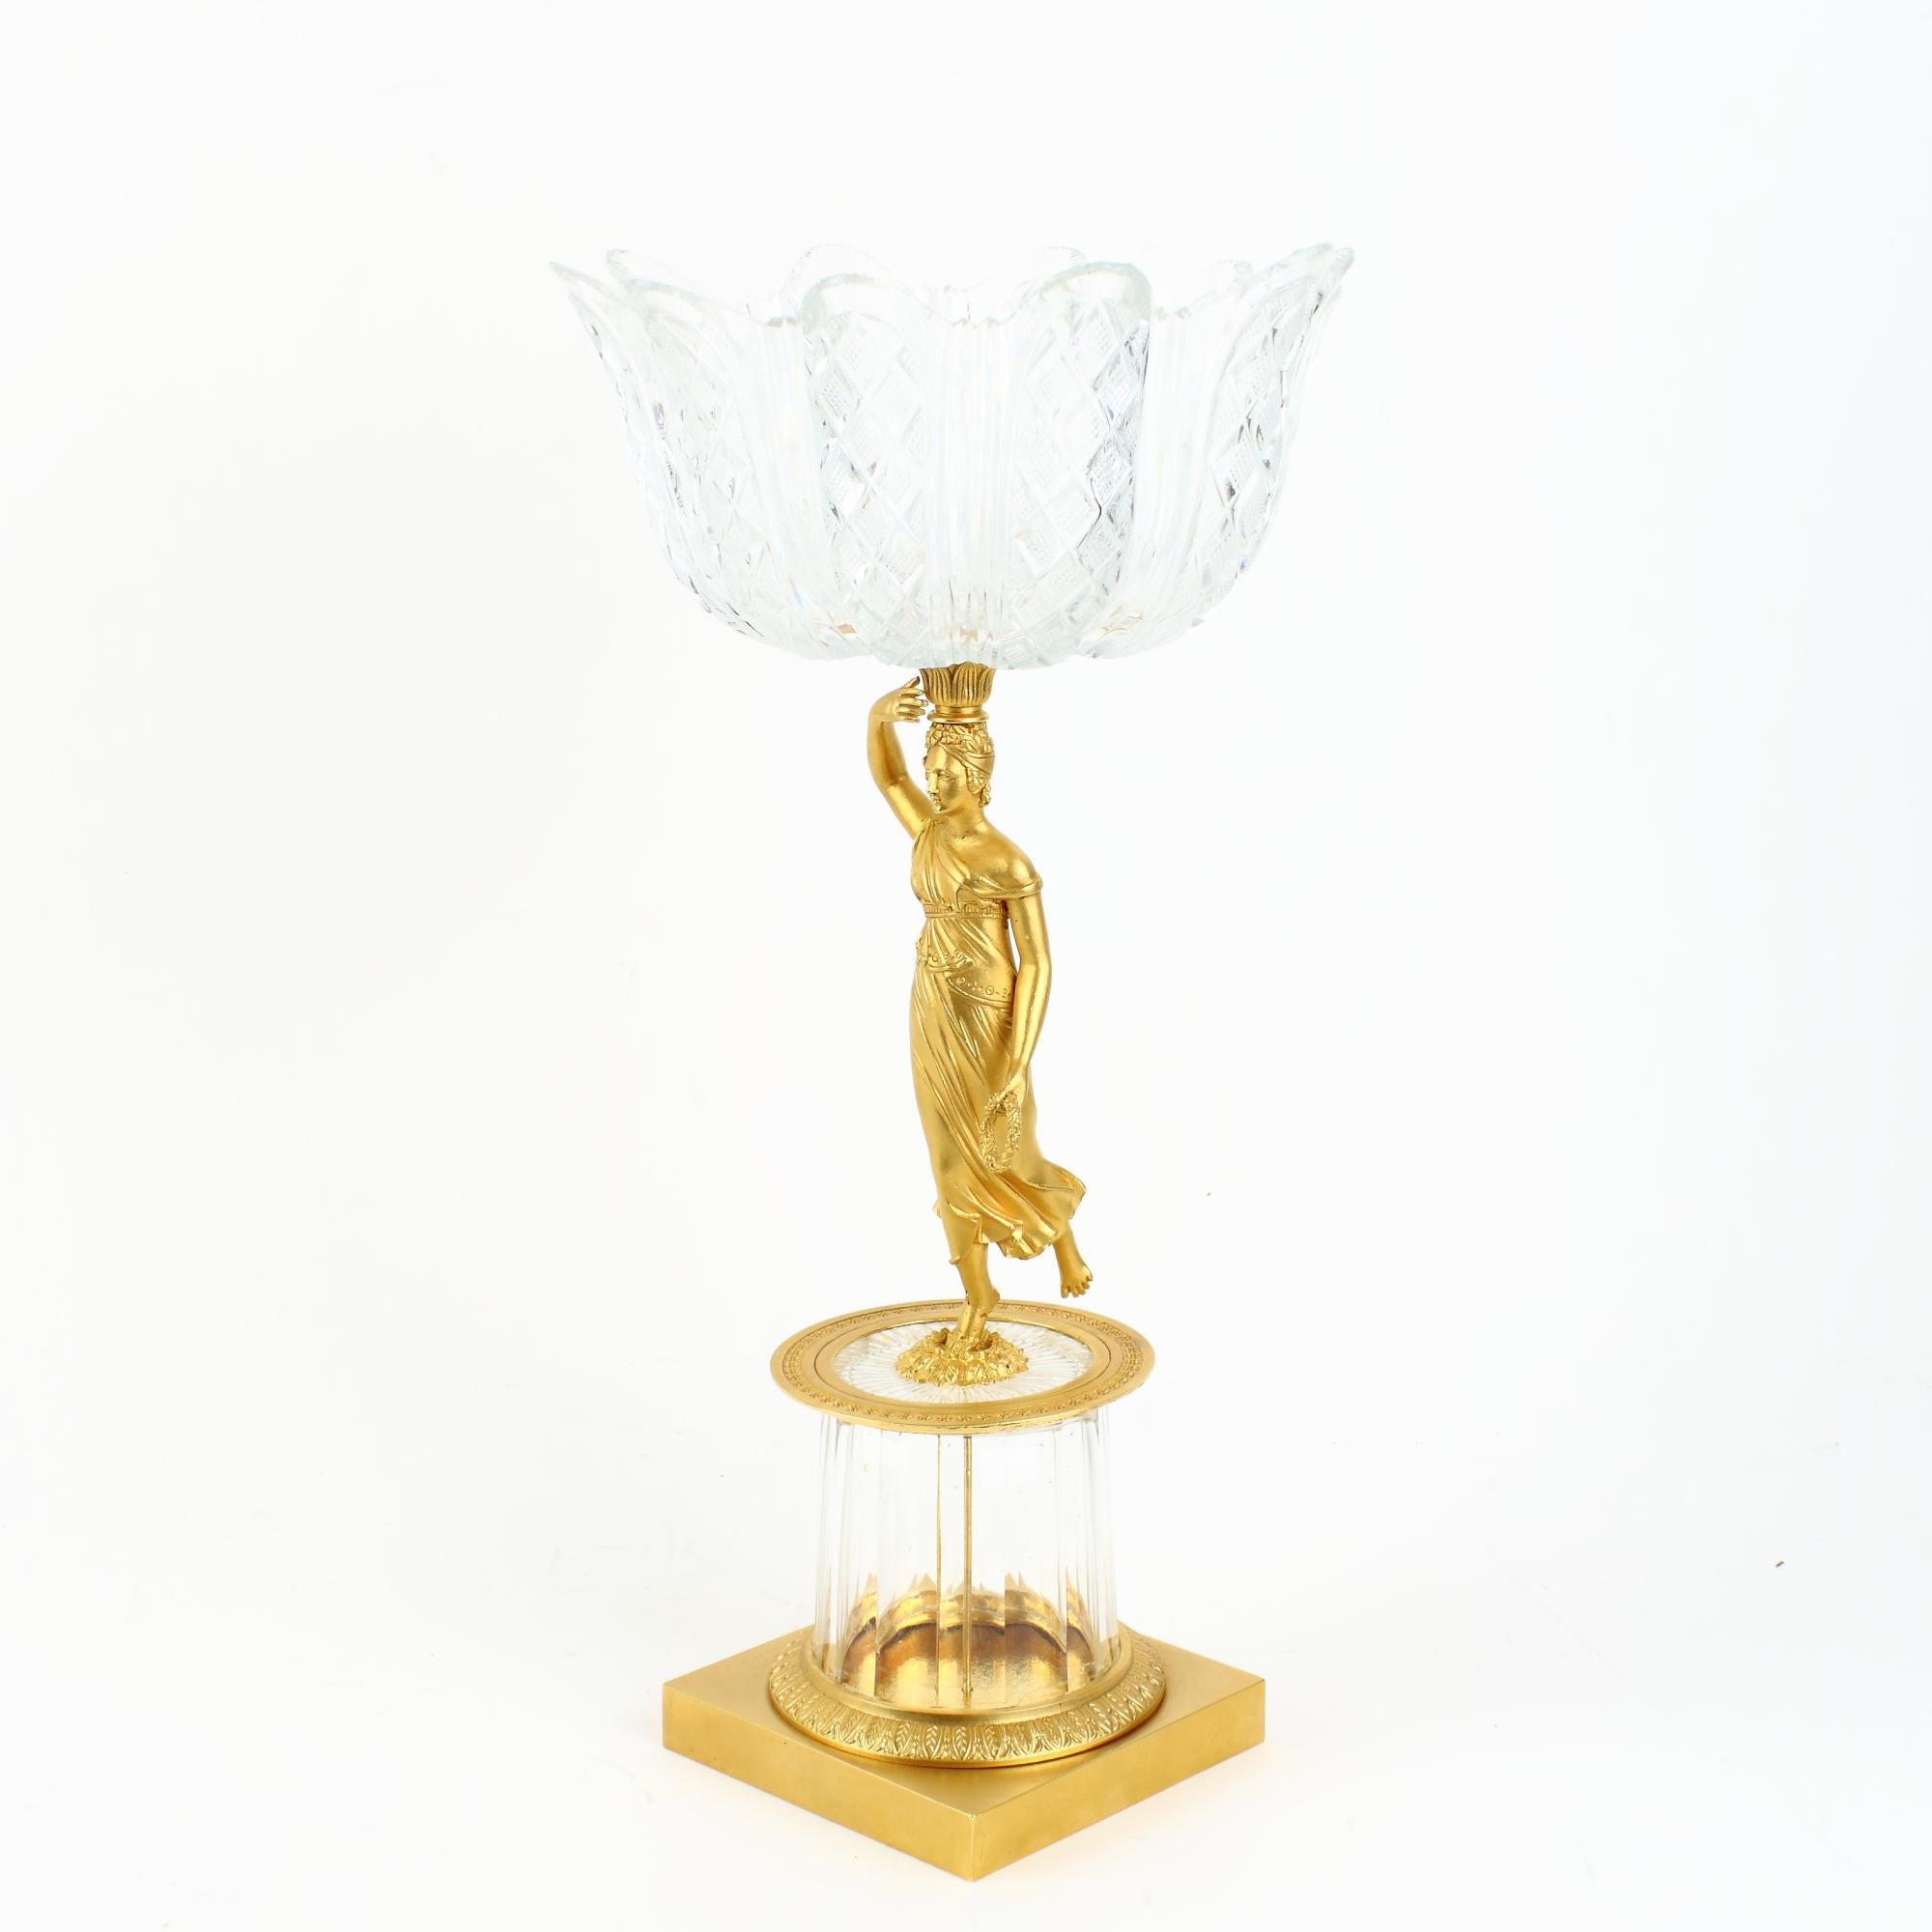 Early 19th century French empire gilt bronze and glass figural tazza or bowl.

A gilt bronze figure of a young female wearing an ancient Greek style peplum standing on a round faceted crystal glass base with a gilt bronze plinth. The figure is